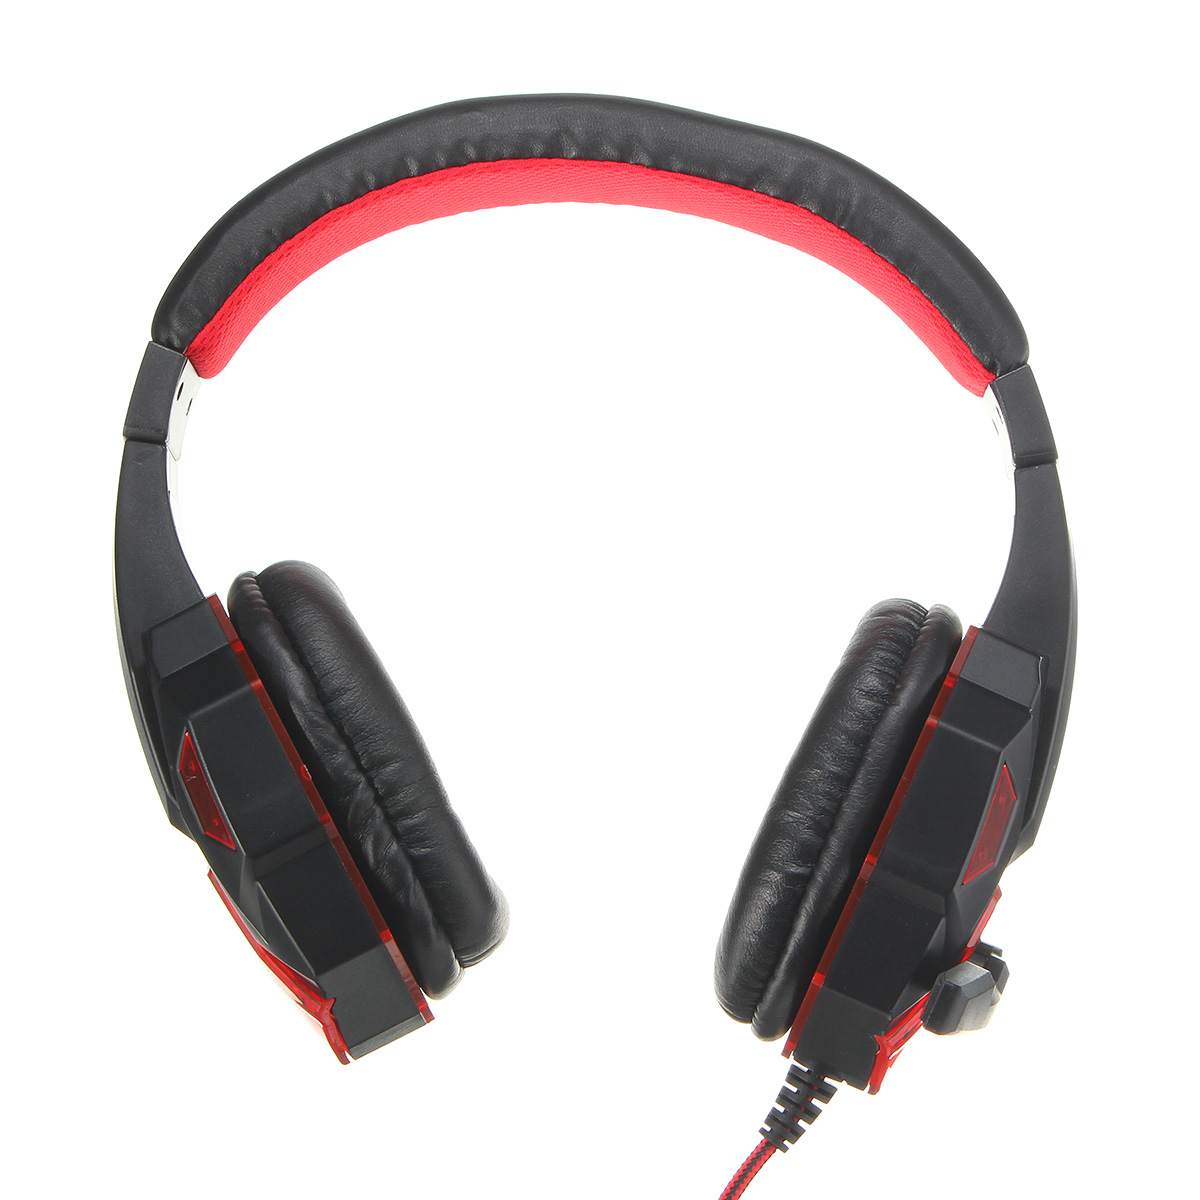 USB-35mm-LED-Surround-Stereo-Gaming-Headset-Headbrand-Headphone-With-Mic-1164073-4